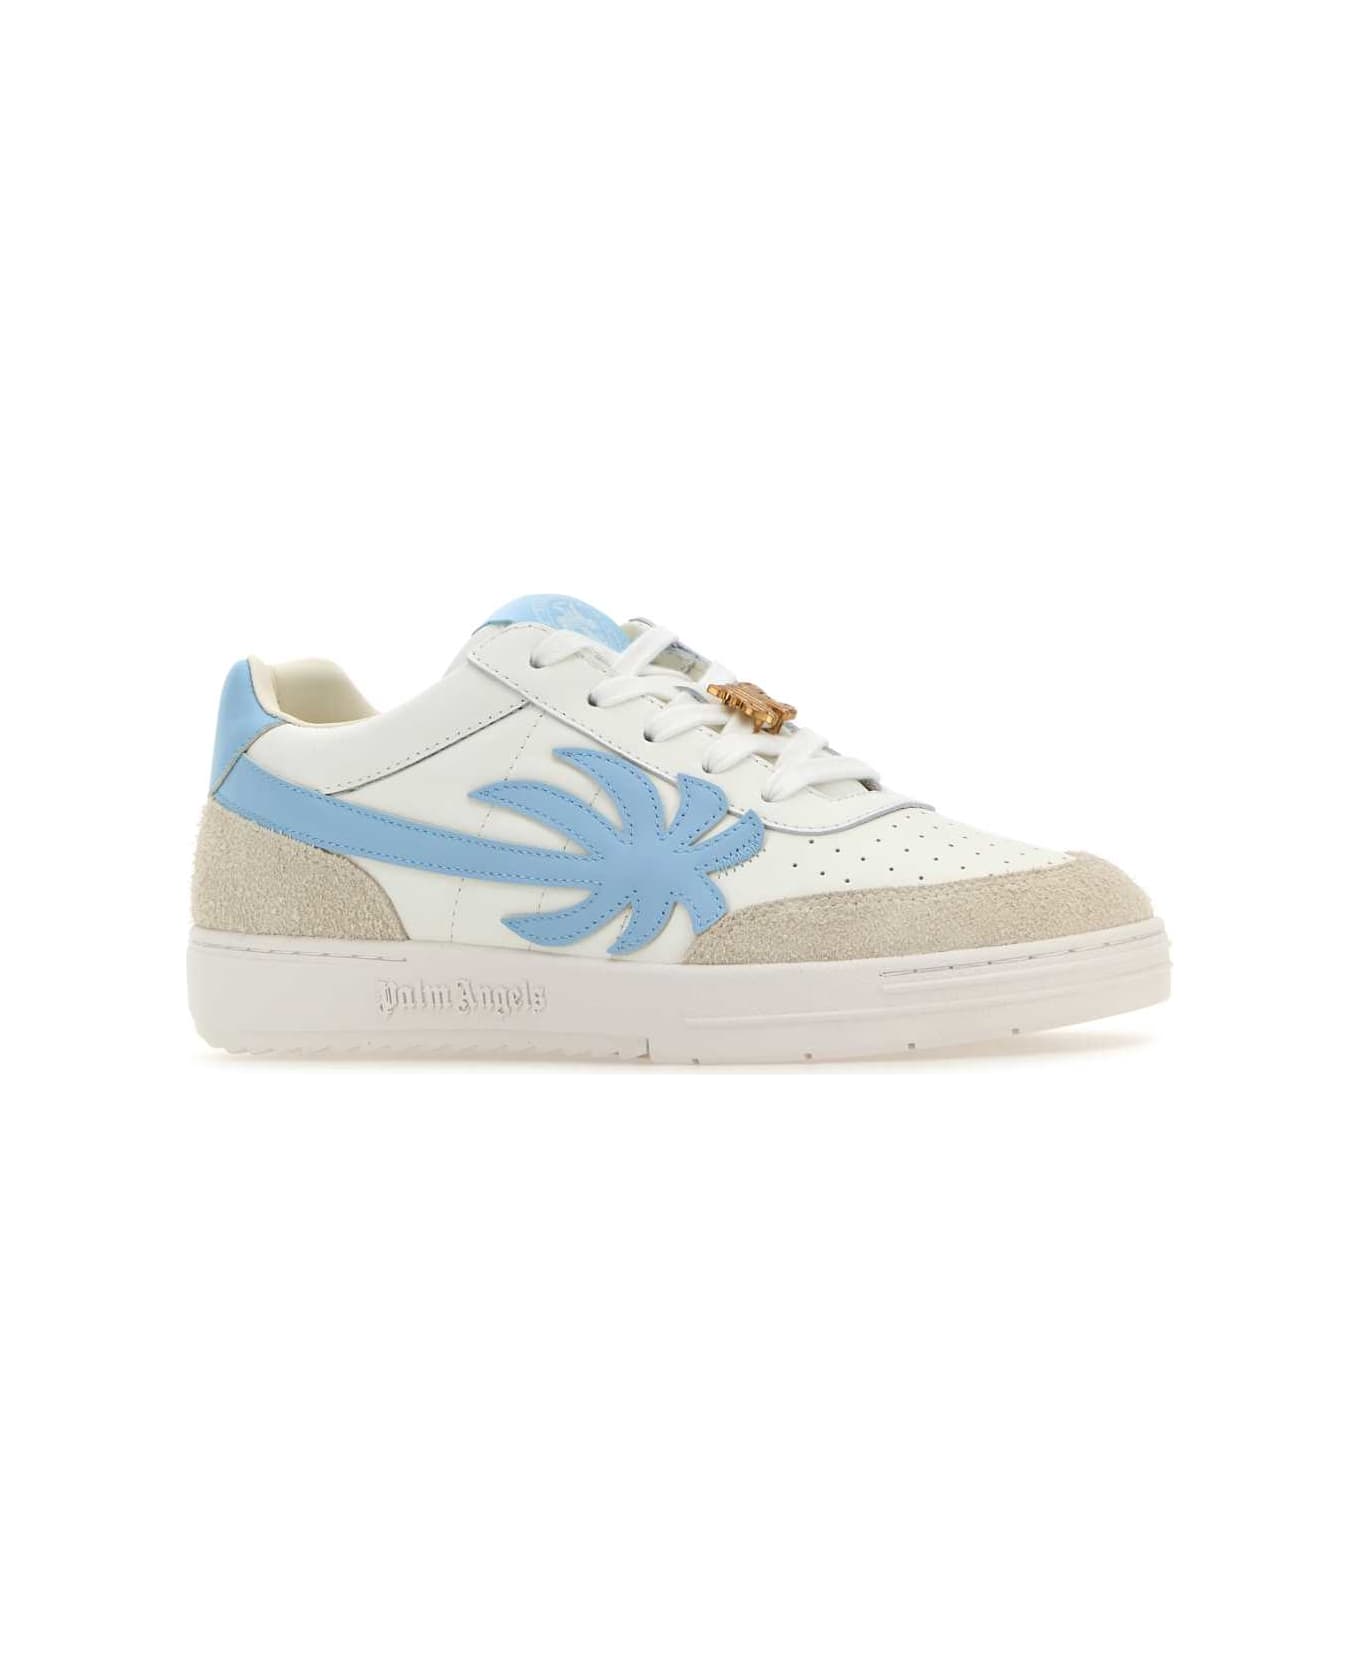 Palm Angels Multicolor Leather Palm Beach University Sneakers - WHITELIGH